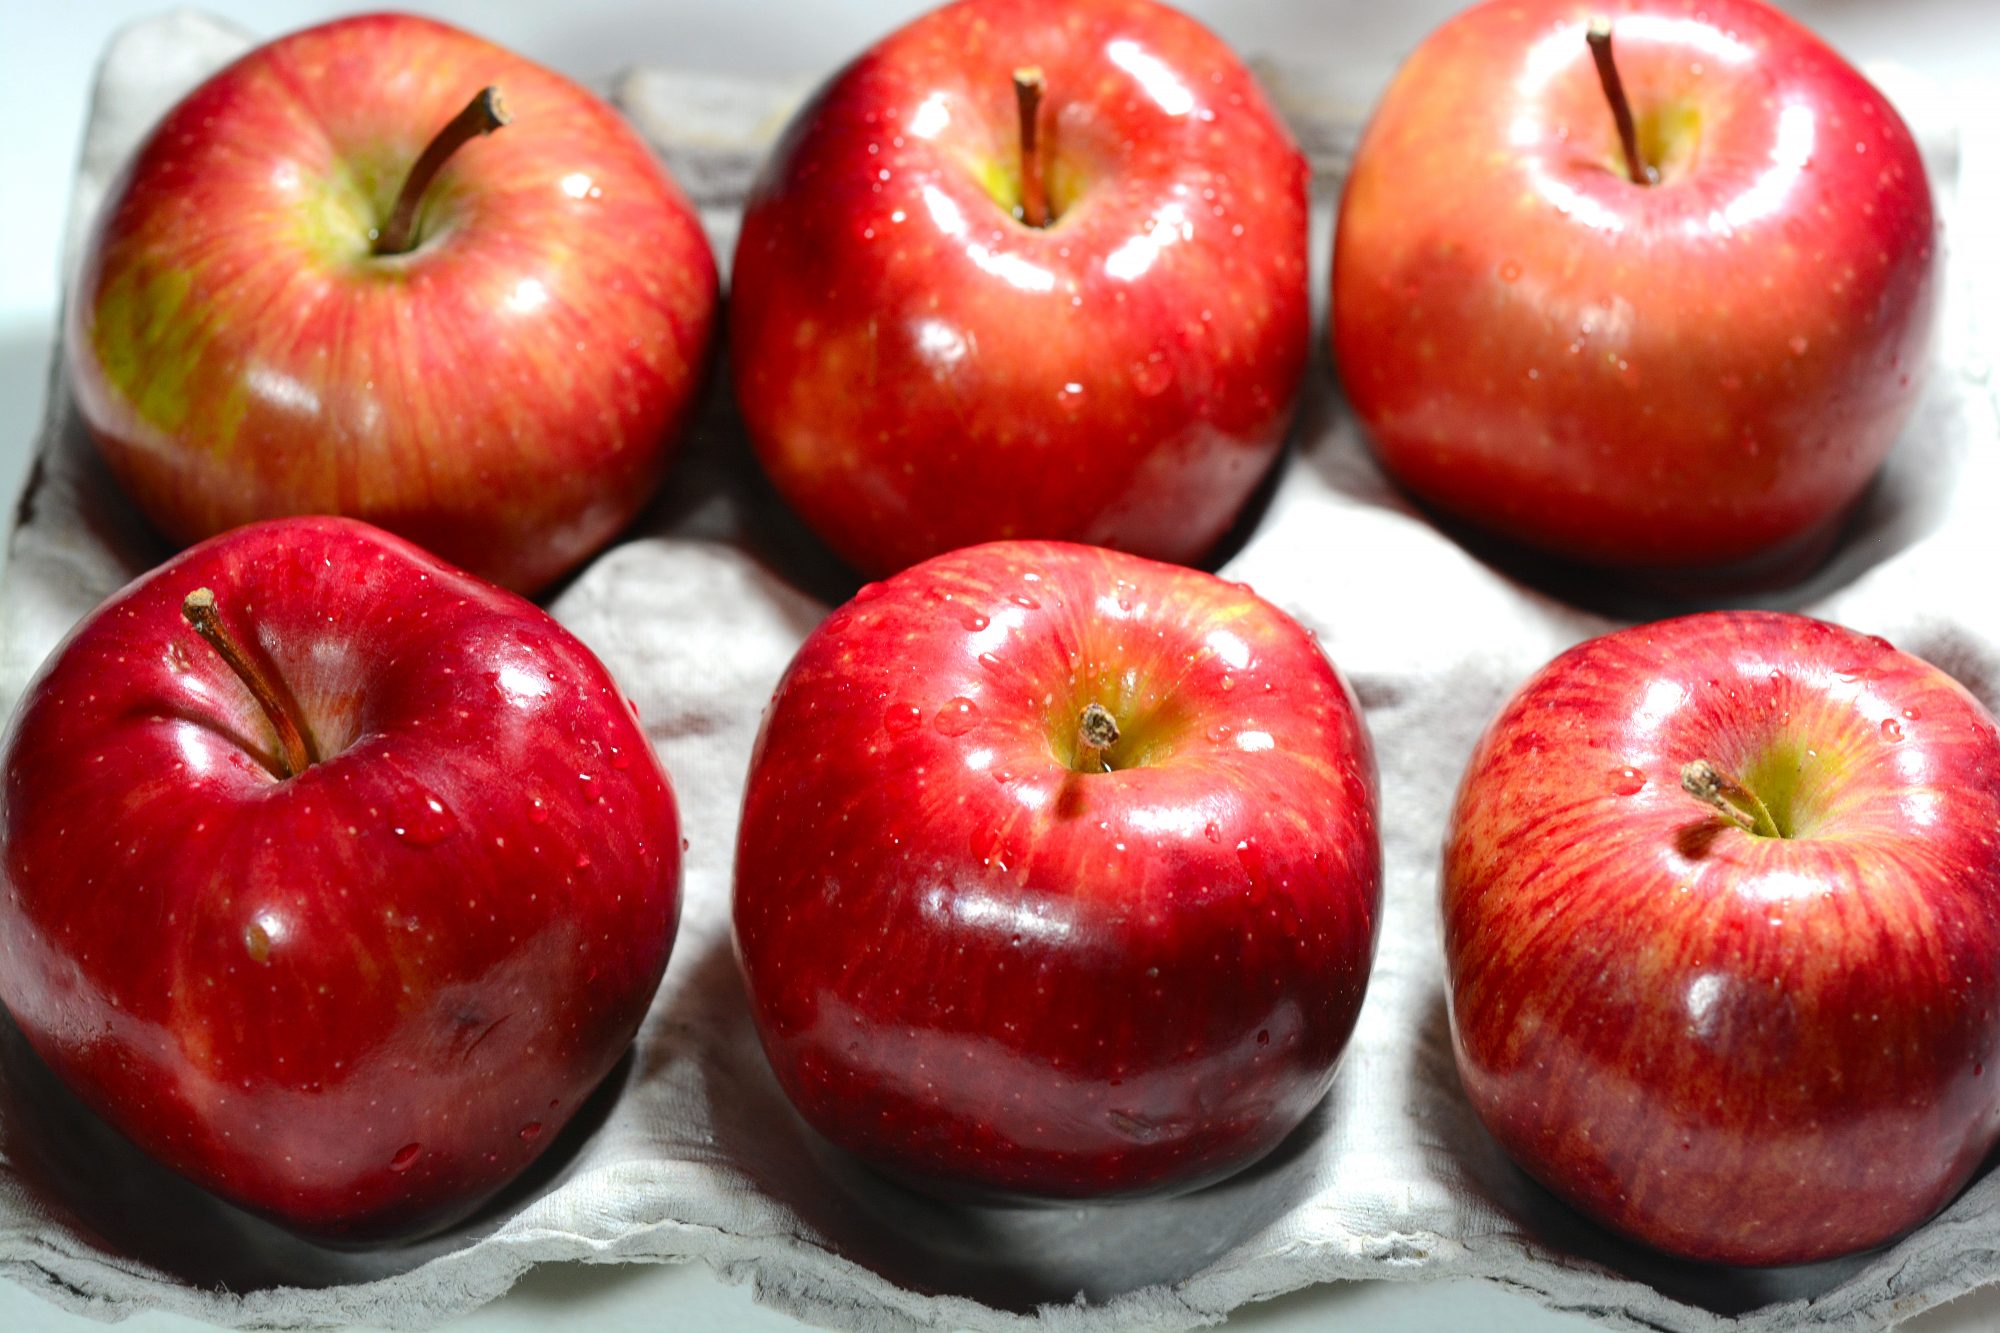 Red Delicious is no longer America's favorite apple